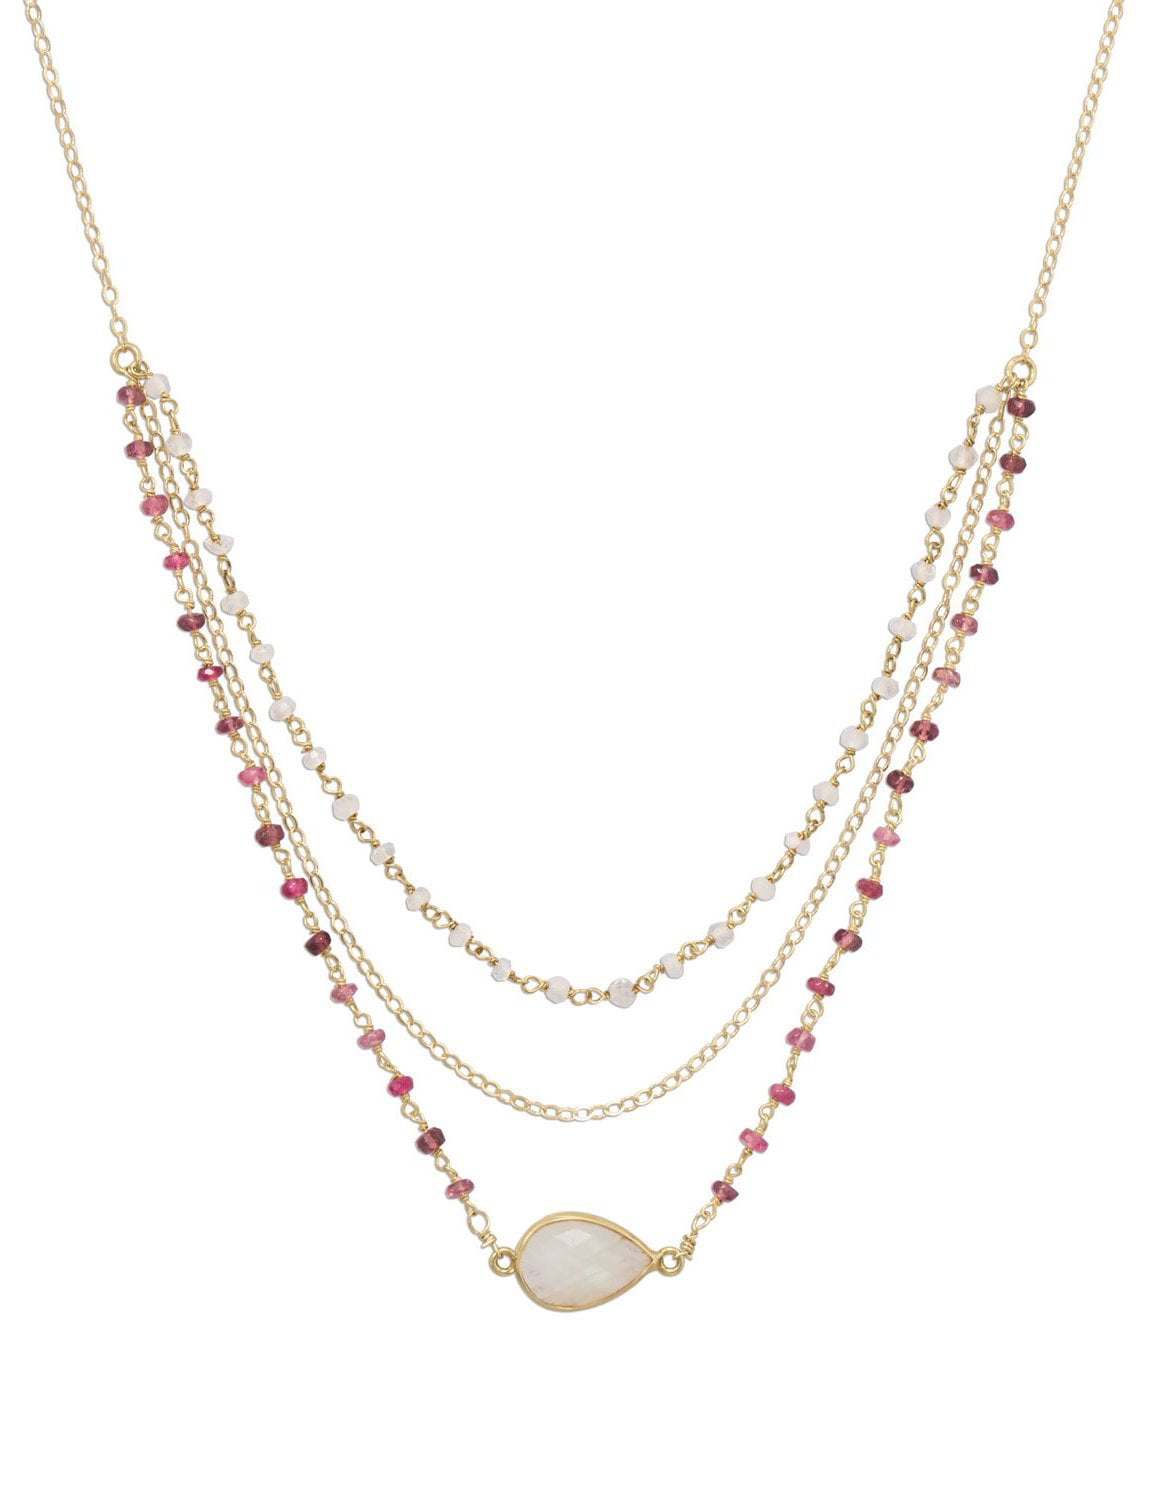 FLORA CRESCENT MOONSTONE Necklace Customizable With Any Stone 925 Sterling Silver or 14k Gold Filled